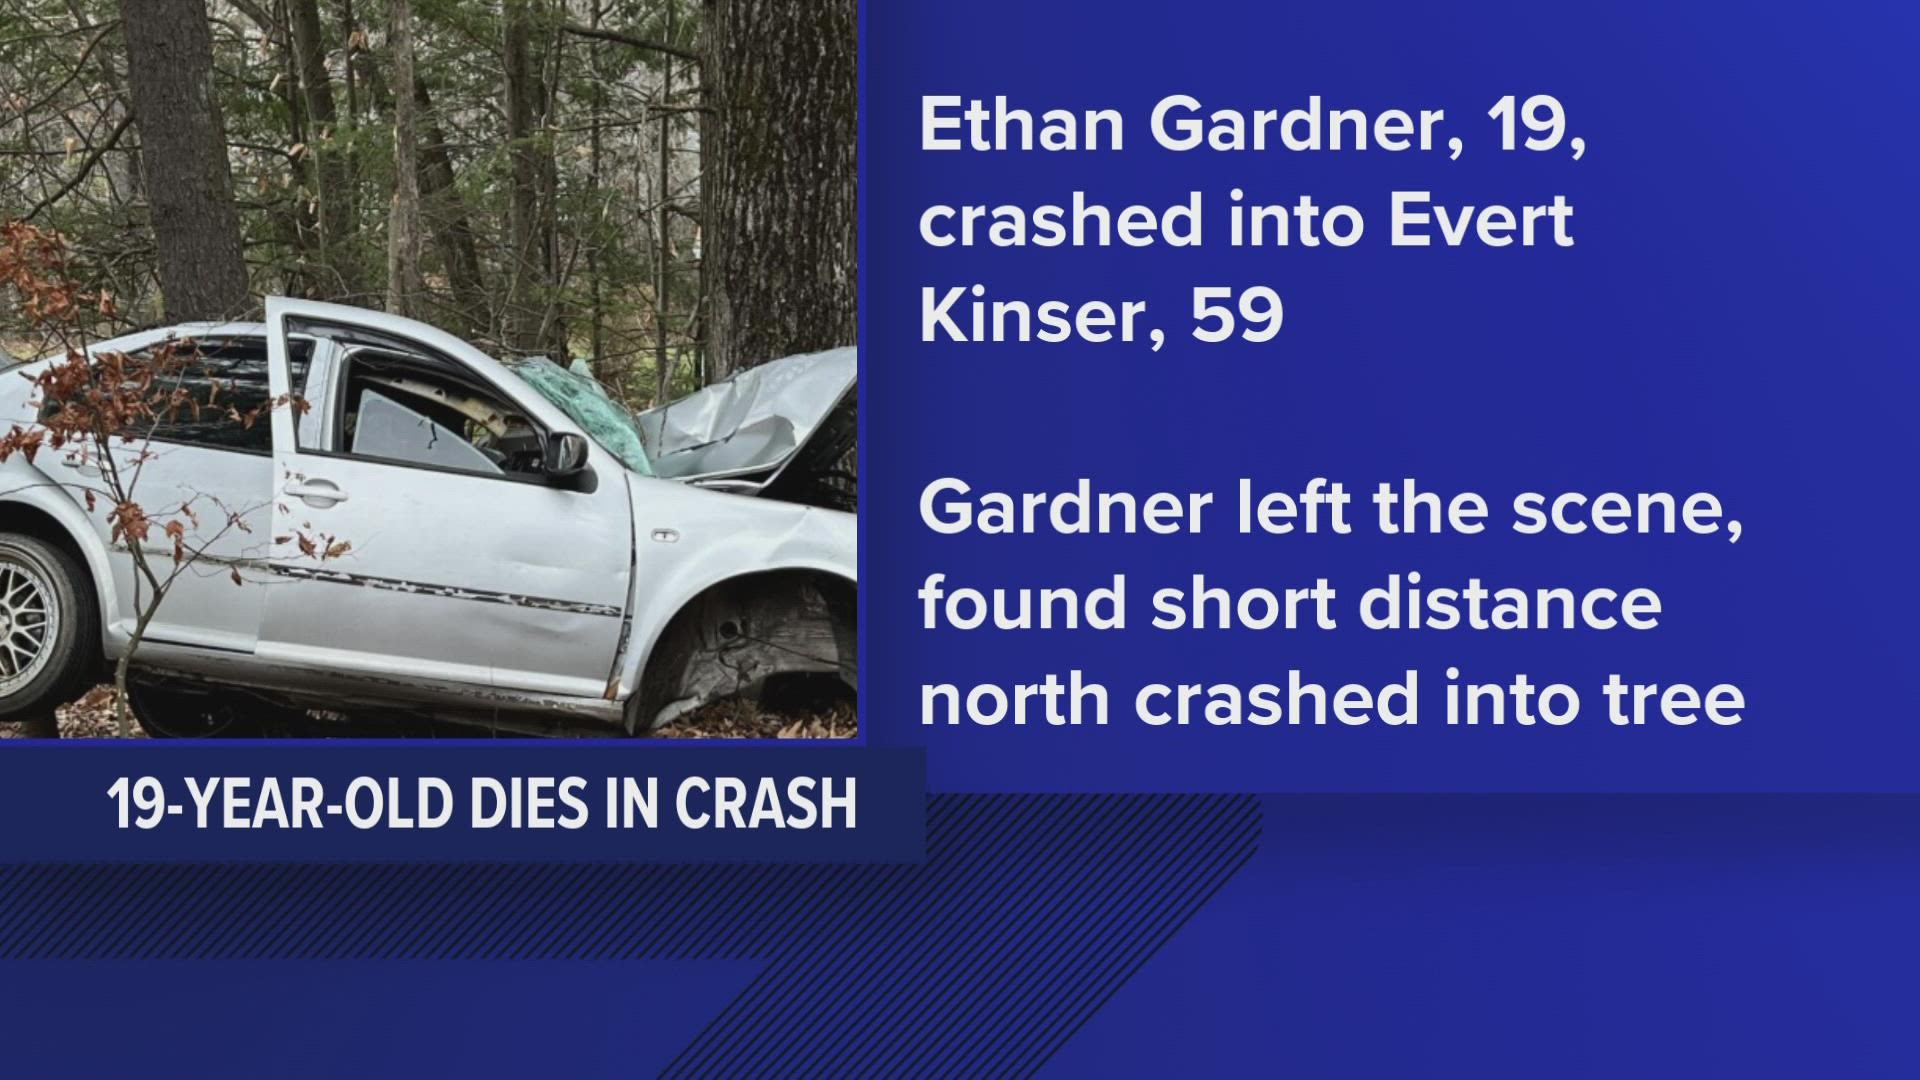 Police said 19-year-old Ethan Gardner hit a stopped pickup truck at a traffic light, drove off before deputies arrived, and died when he hit a tree on Route 35.